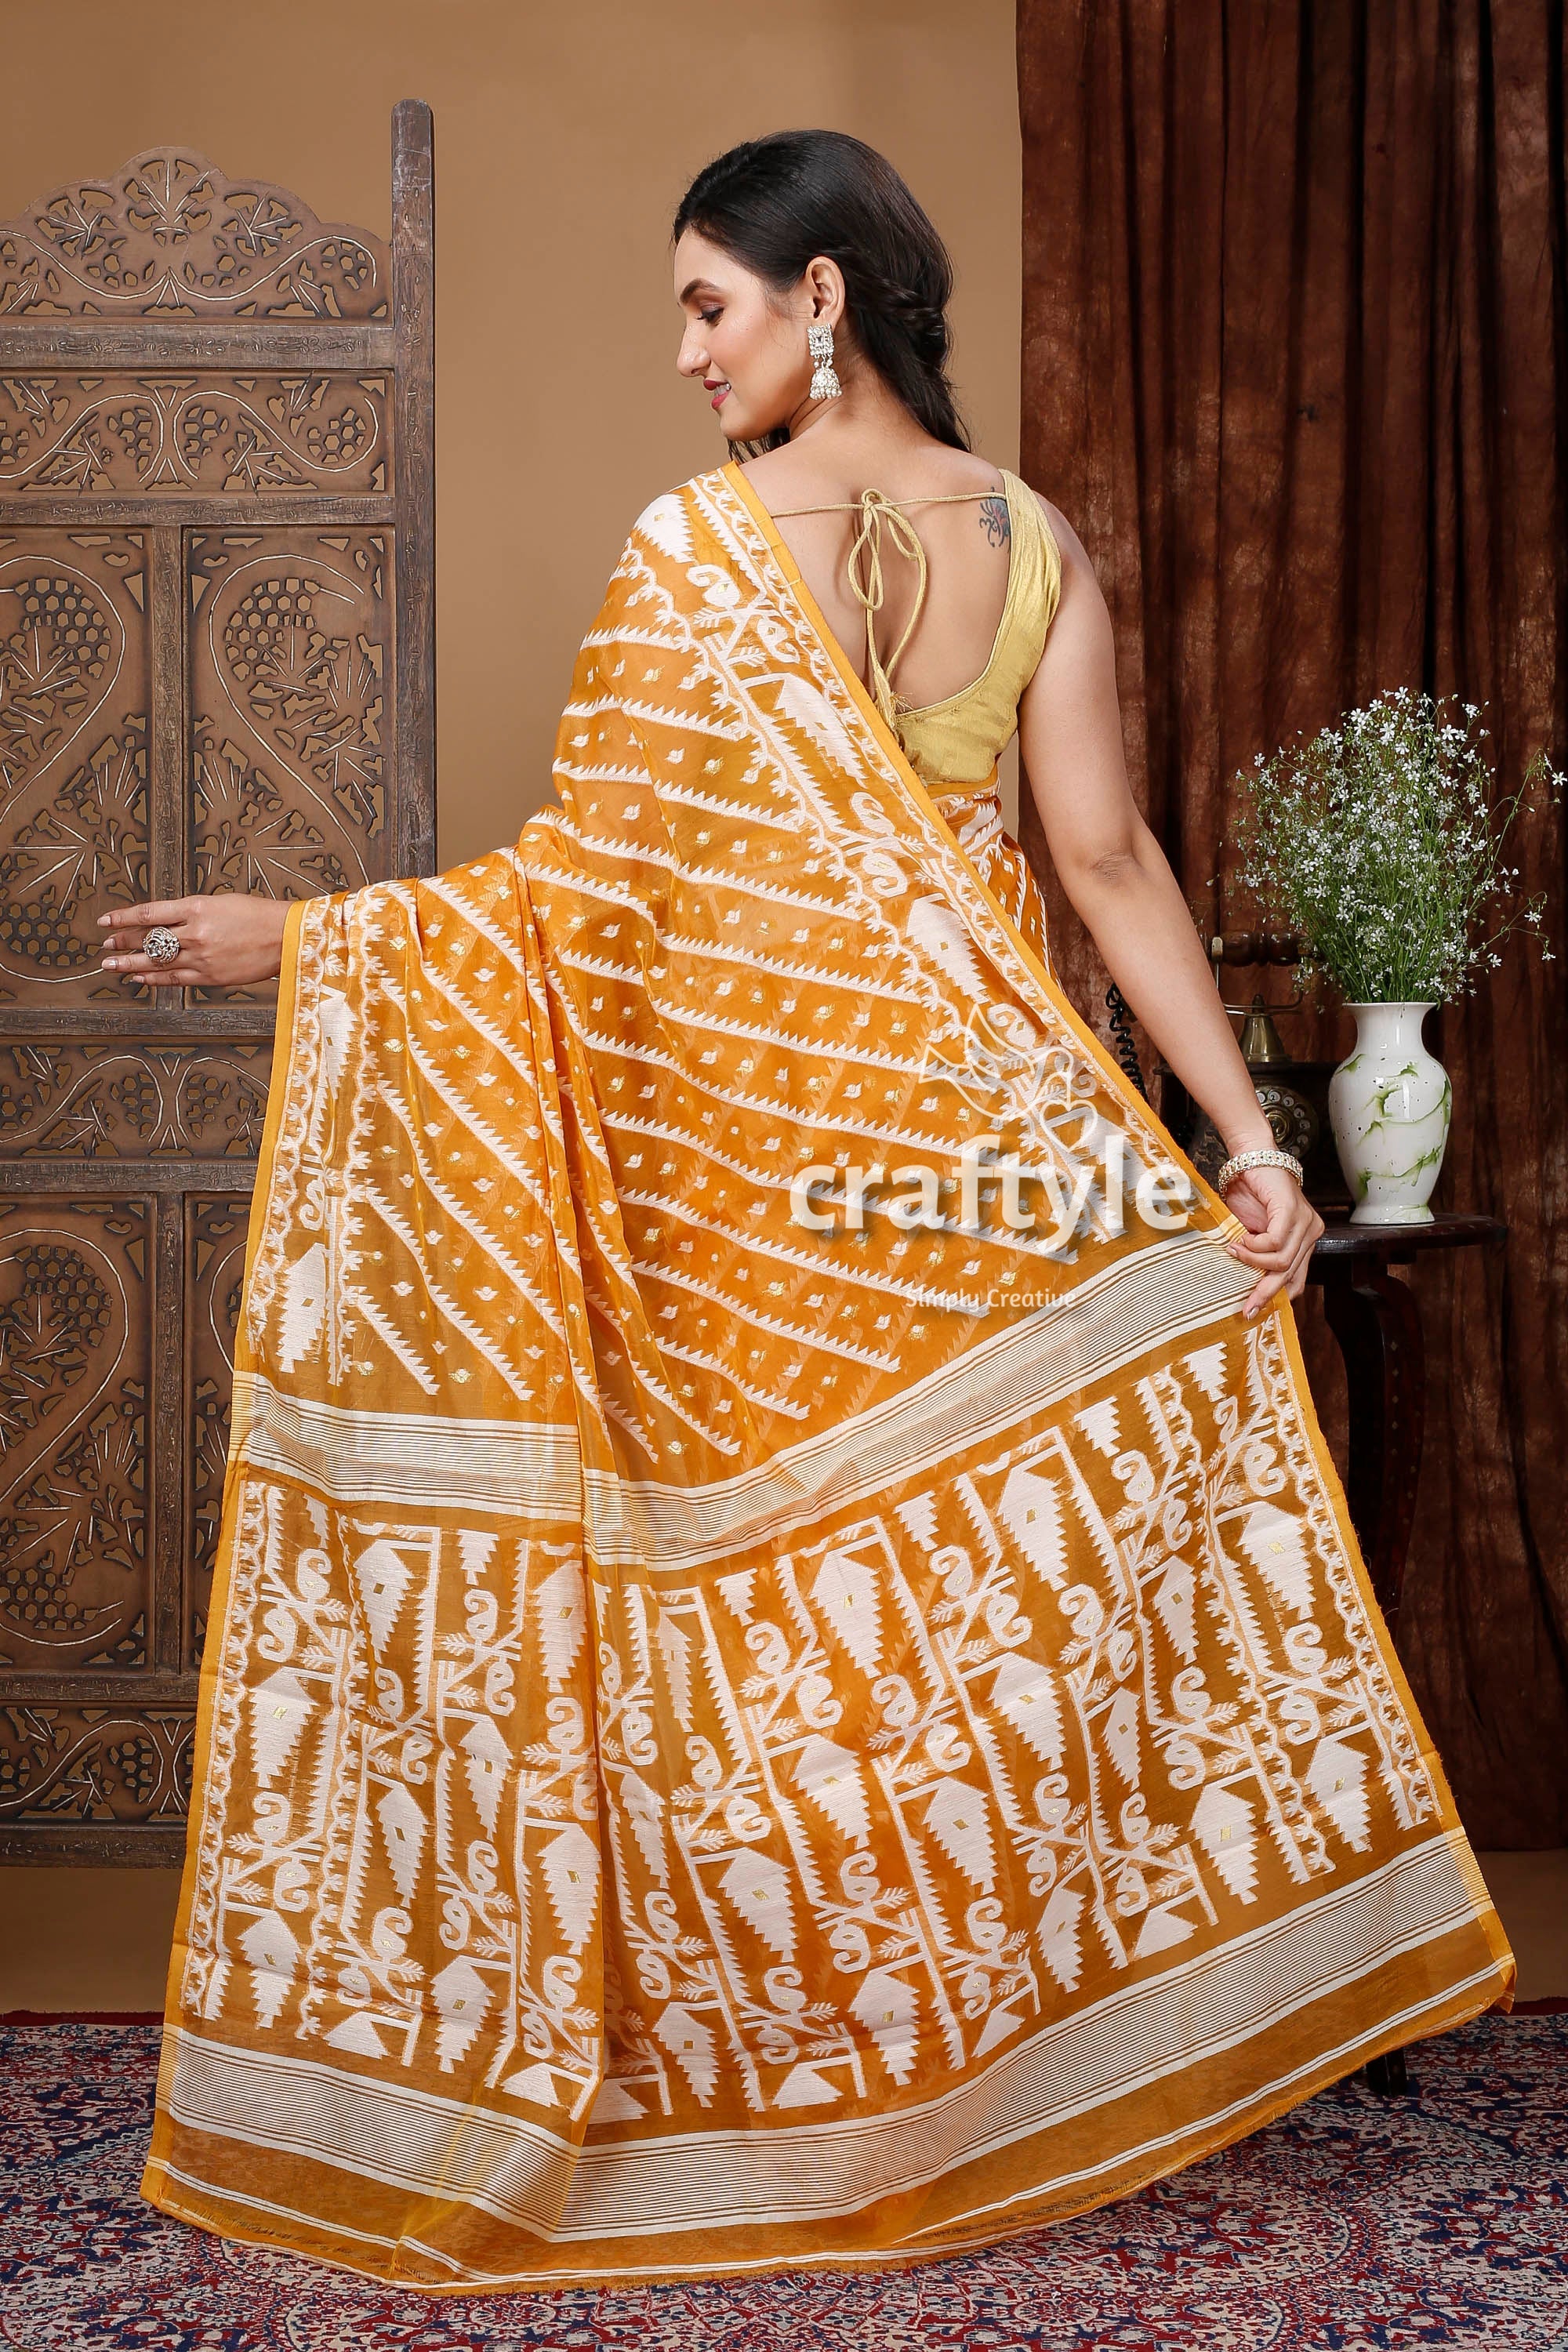 Timeless Earth Yellow and White Jamdani Saree - Traditional Artistry - Craftyle